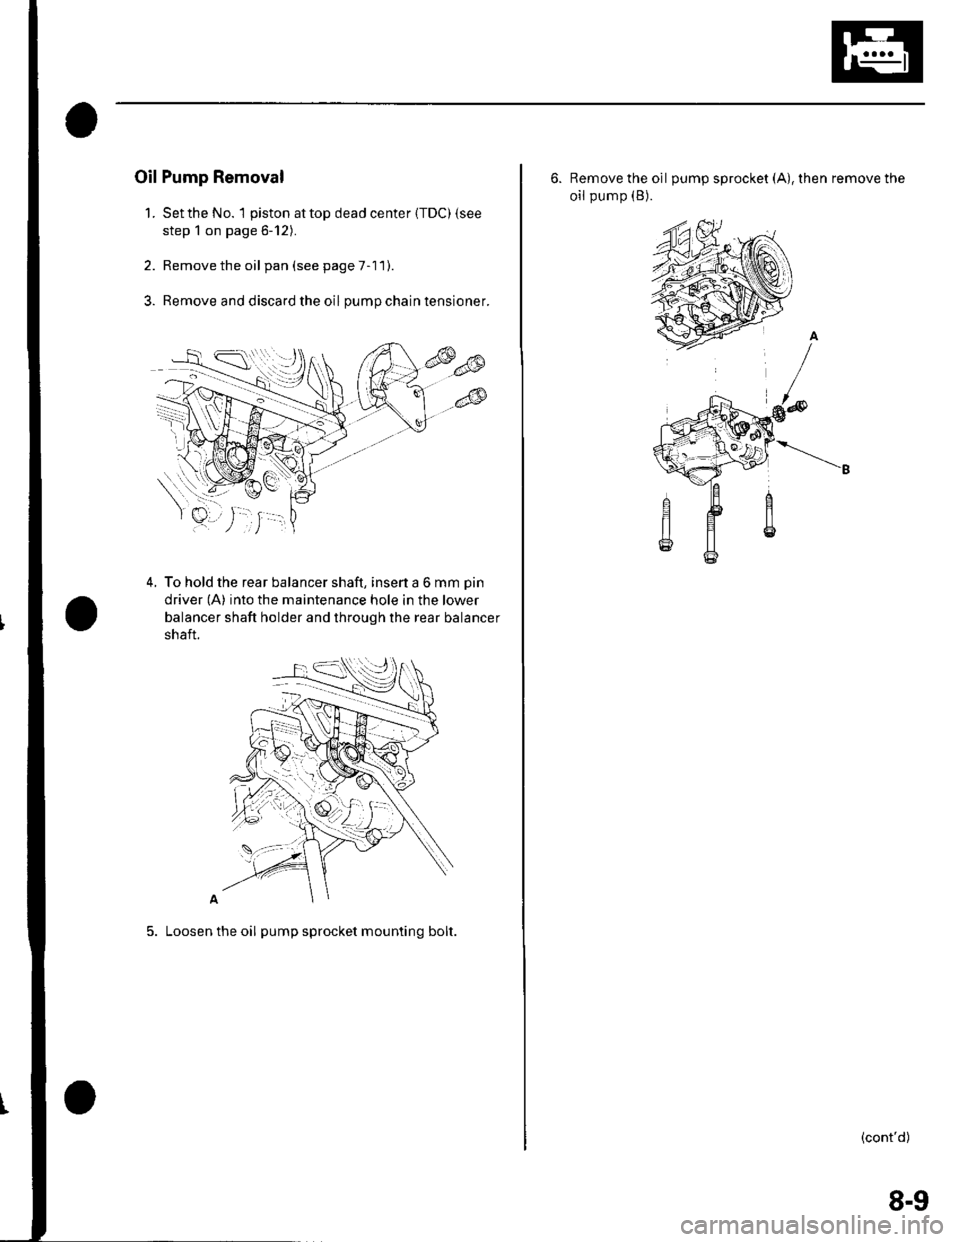 HONDA CIVIC 2003 7.G Owners Manual Oil Pump Removal
1. Setthe No. 1 piston attop dead center {TDC) {see
step 1 on page 6-12).
2. Remove the oil pan(seepageT-11).
3. Remove and discard the oil pumpchaintensioner.
4. To hold the rear bal